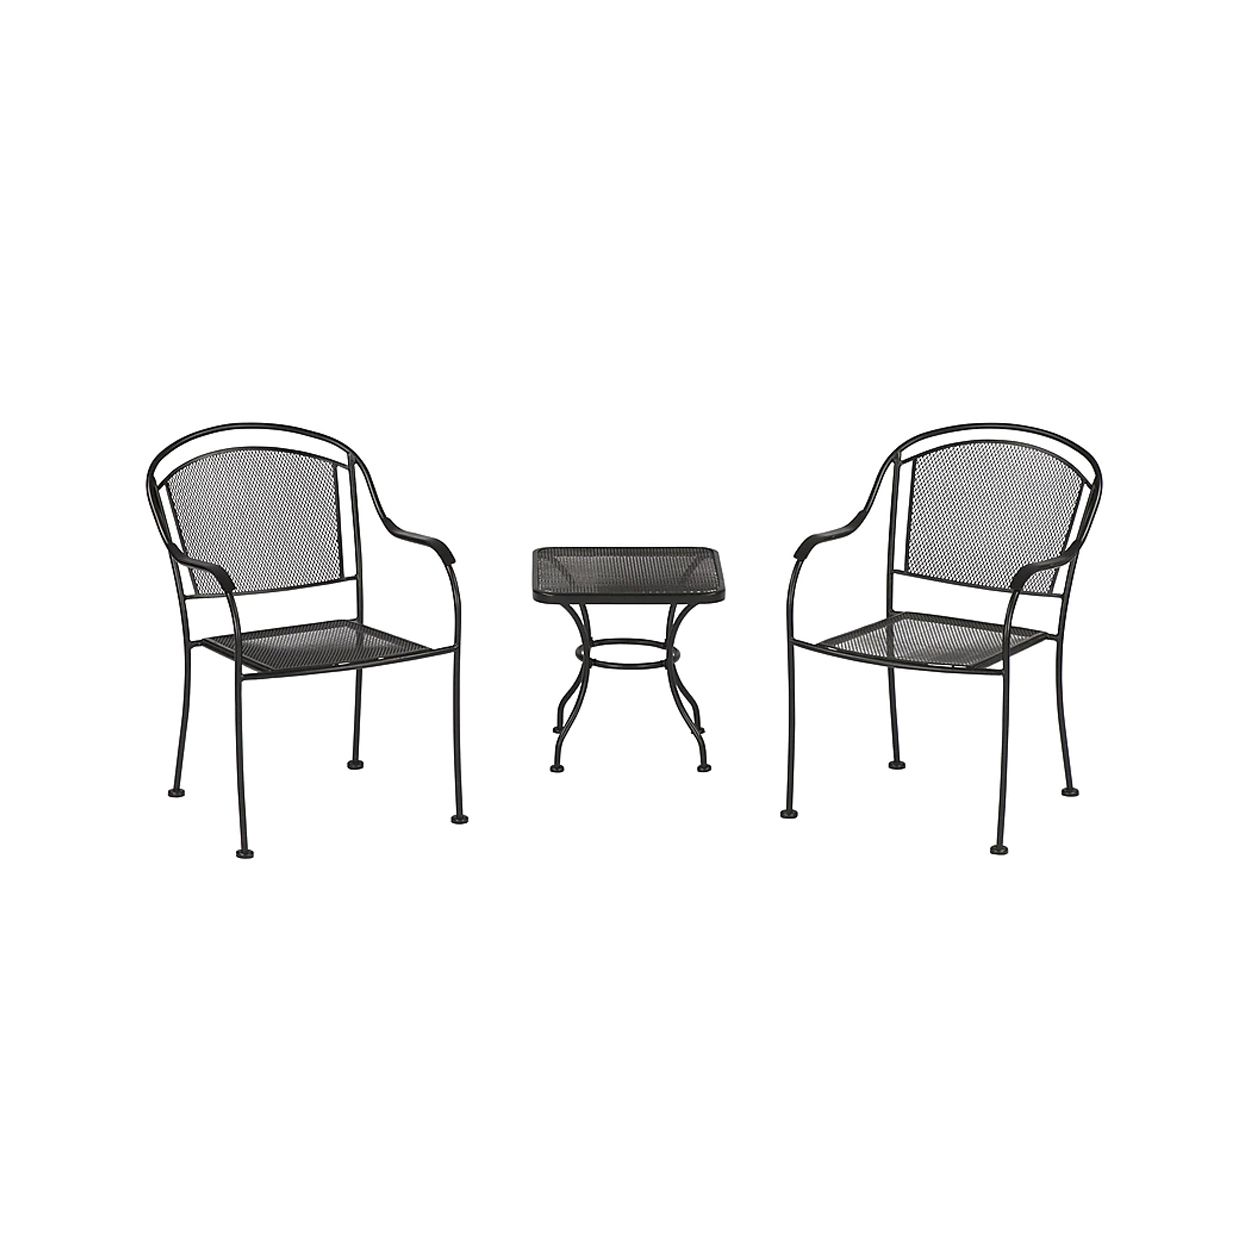 Style Sections Three-Piece Bistro Set